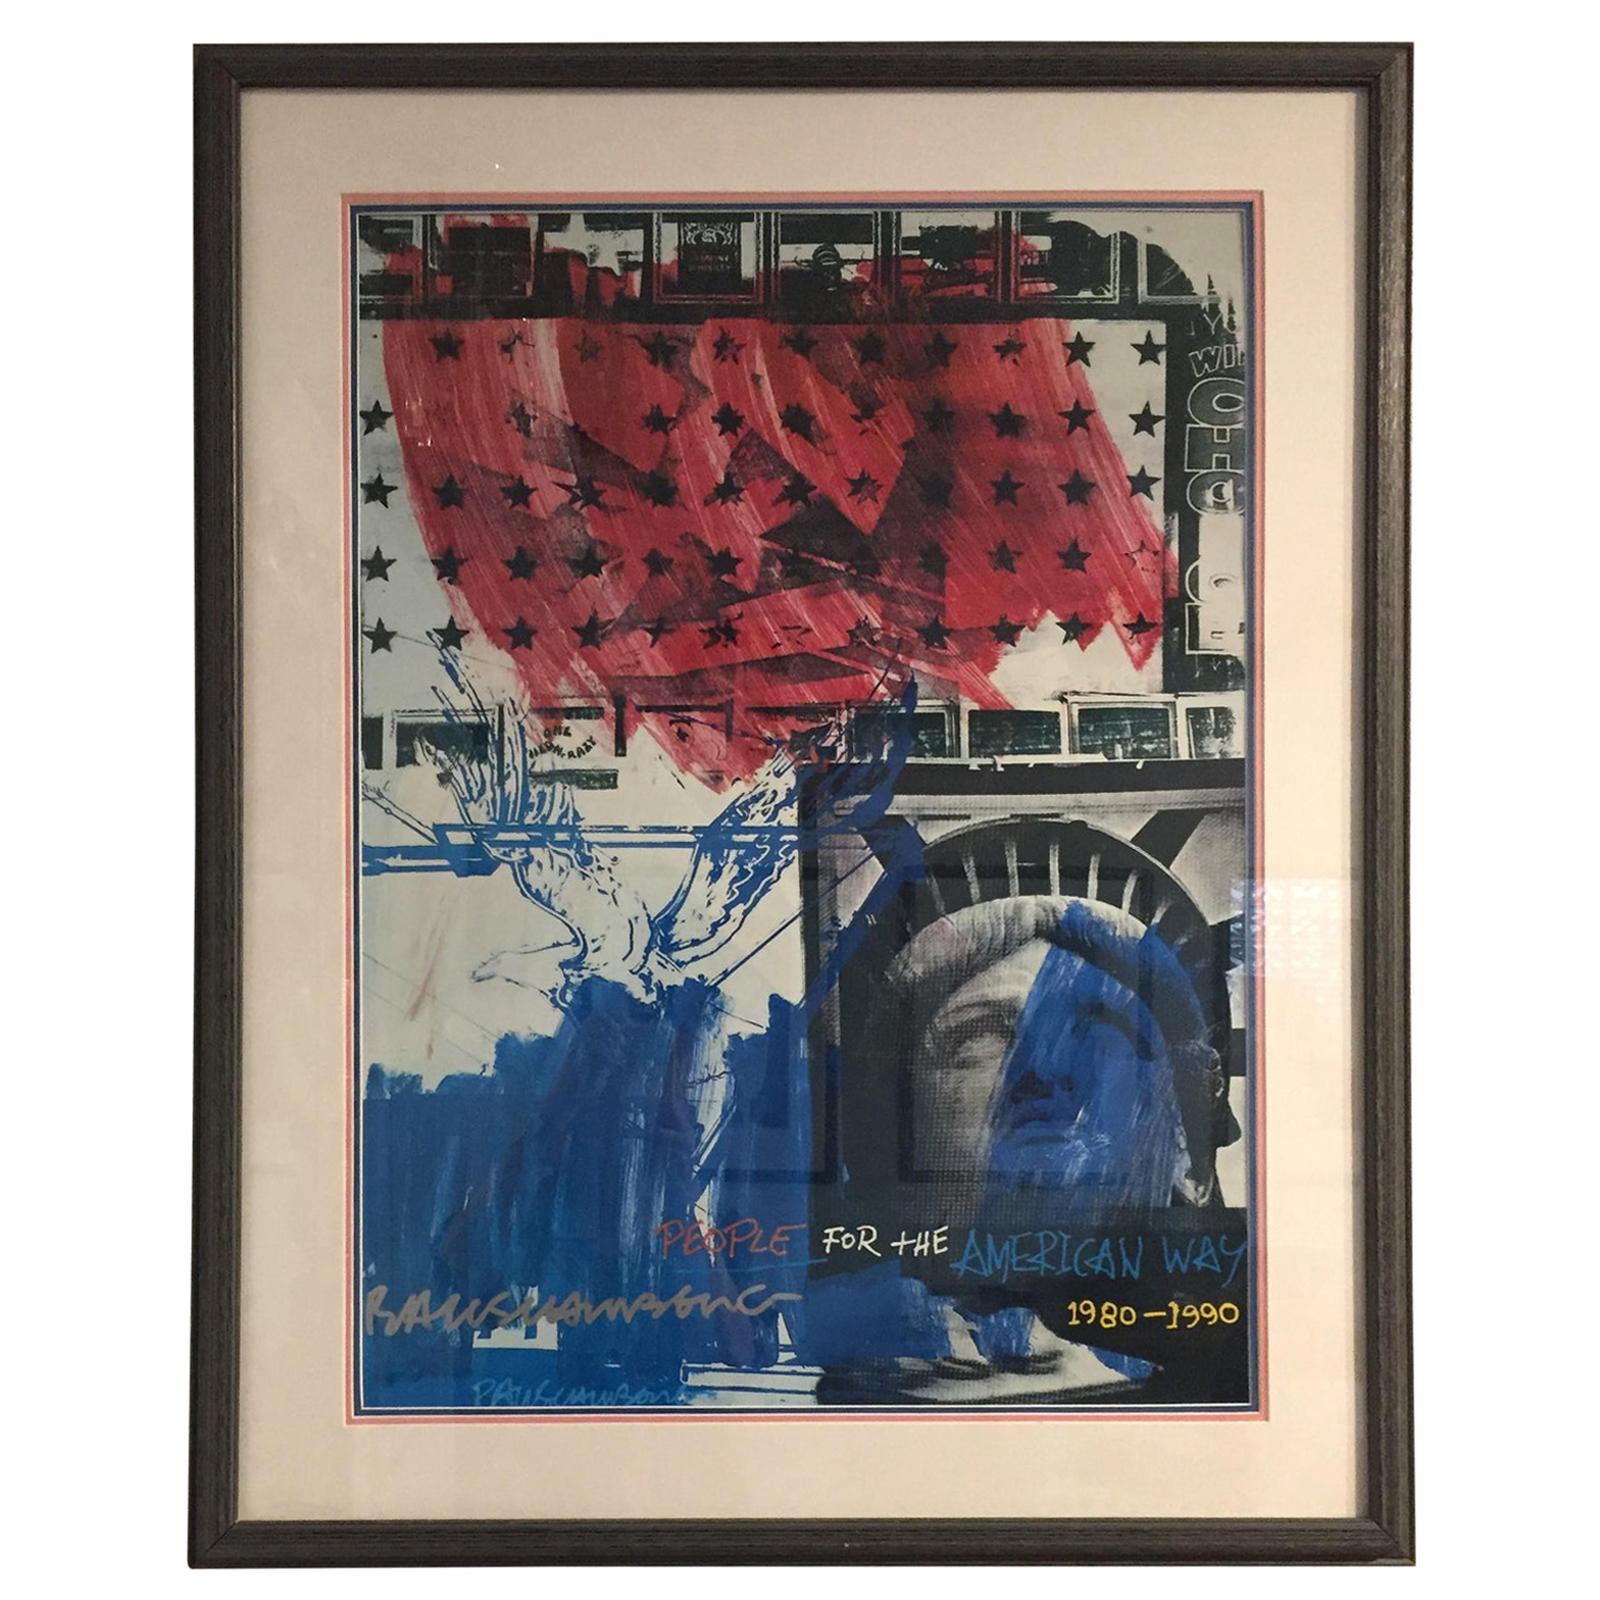 Signed Robert Raushcenberg Print "People for the American Way 1980 1990"